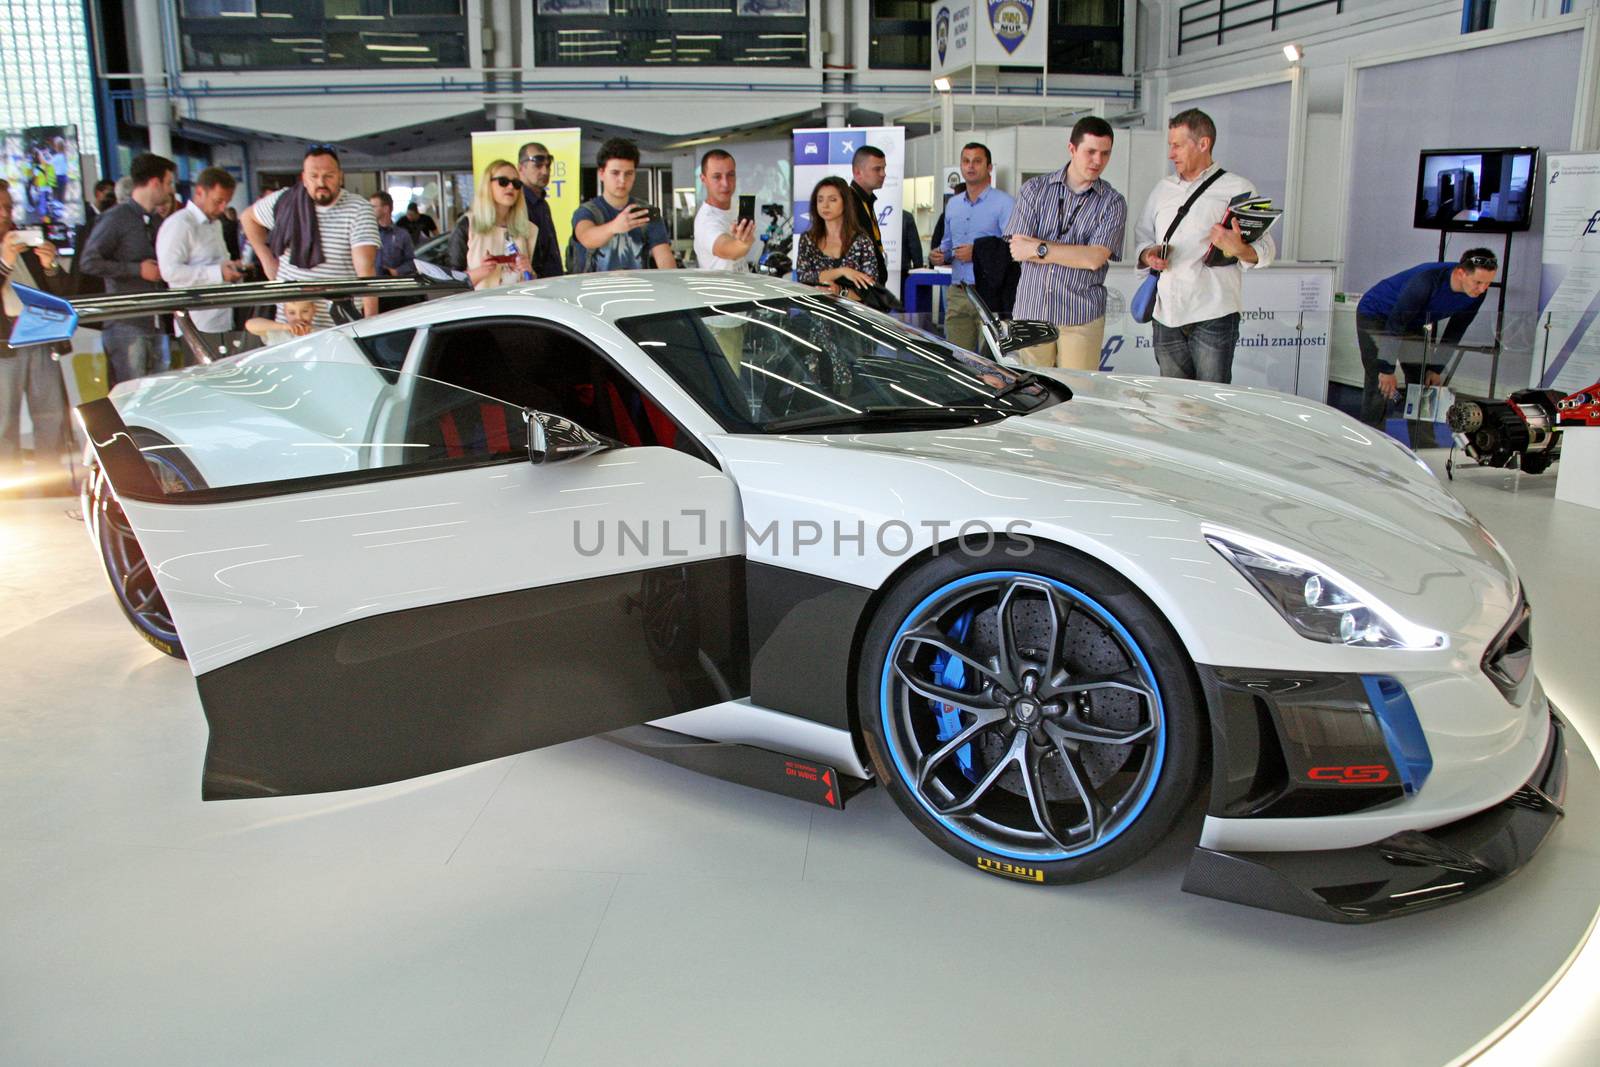 Rimac Concept S,1,front and right side,Zagreb Auto Show 2016.